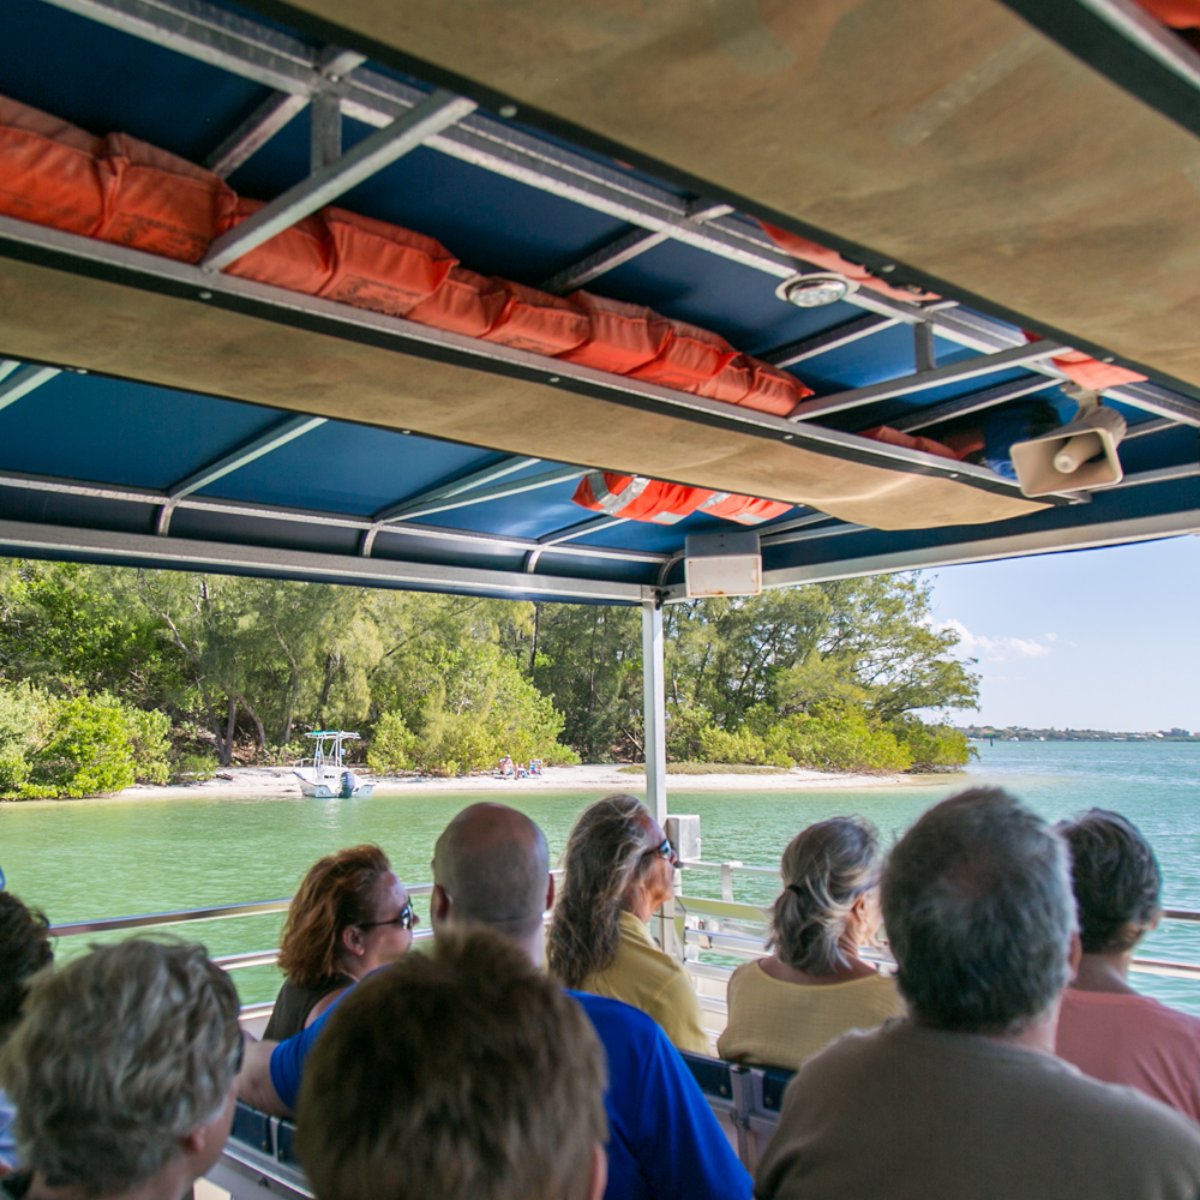 Learn about the ecology, history, and folklore of Sarasota on our Sea Life Encounter Cruise!